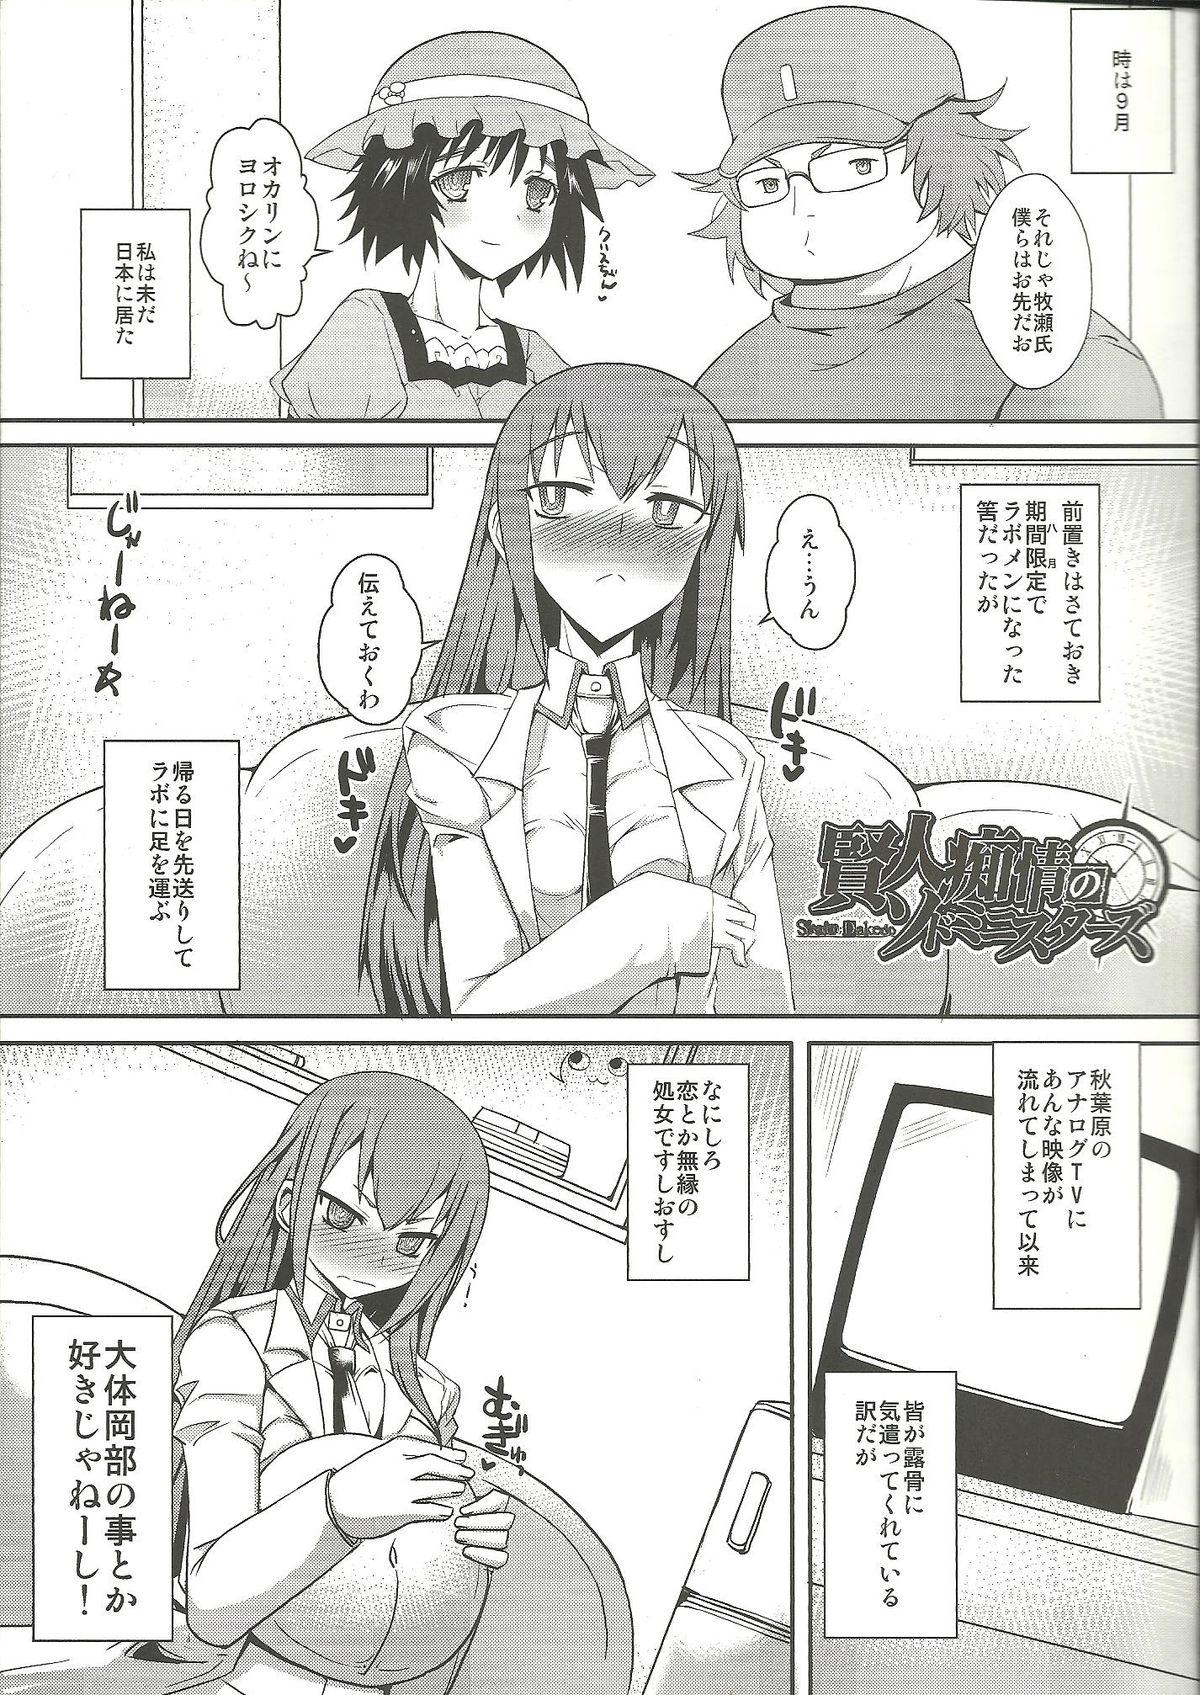 Hermana Kenjin Chijou no Sodoministers - Steinsgate Masseur - Page 4